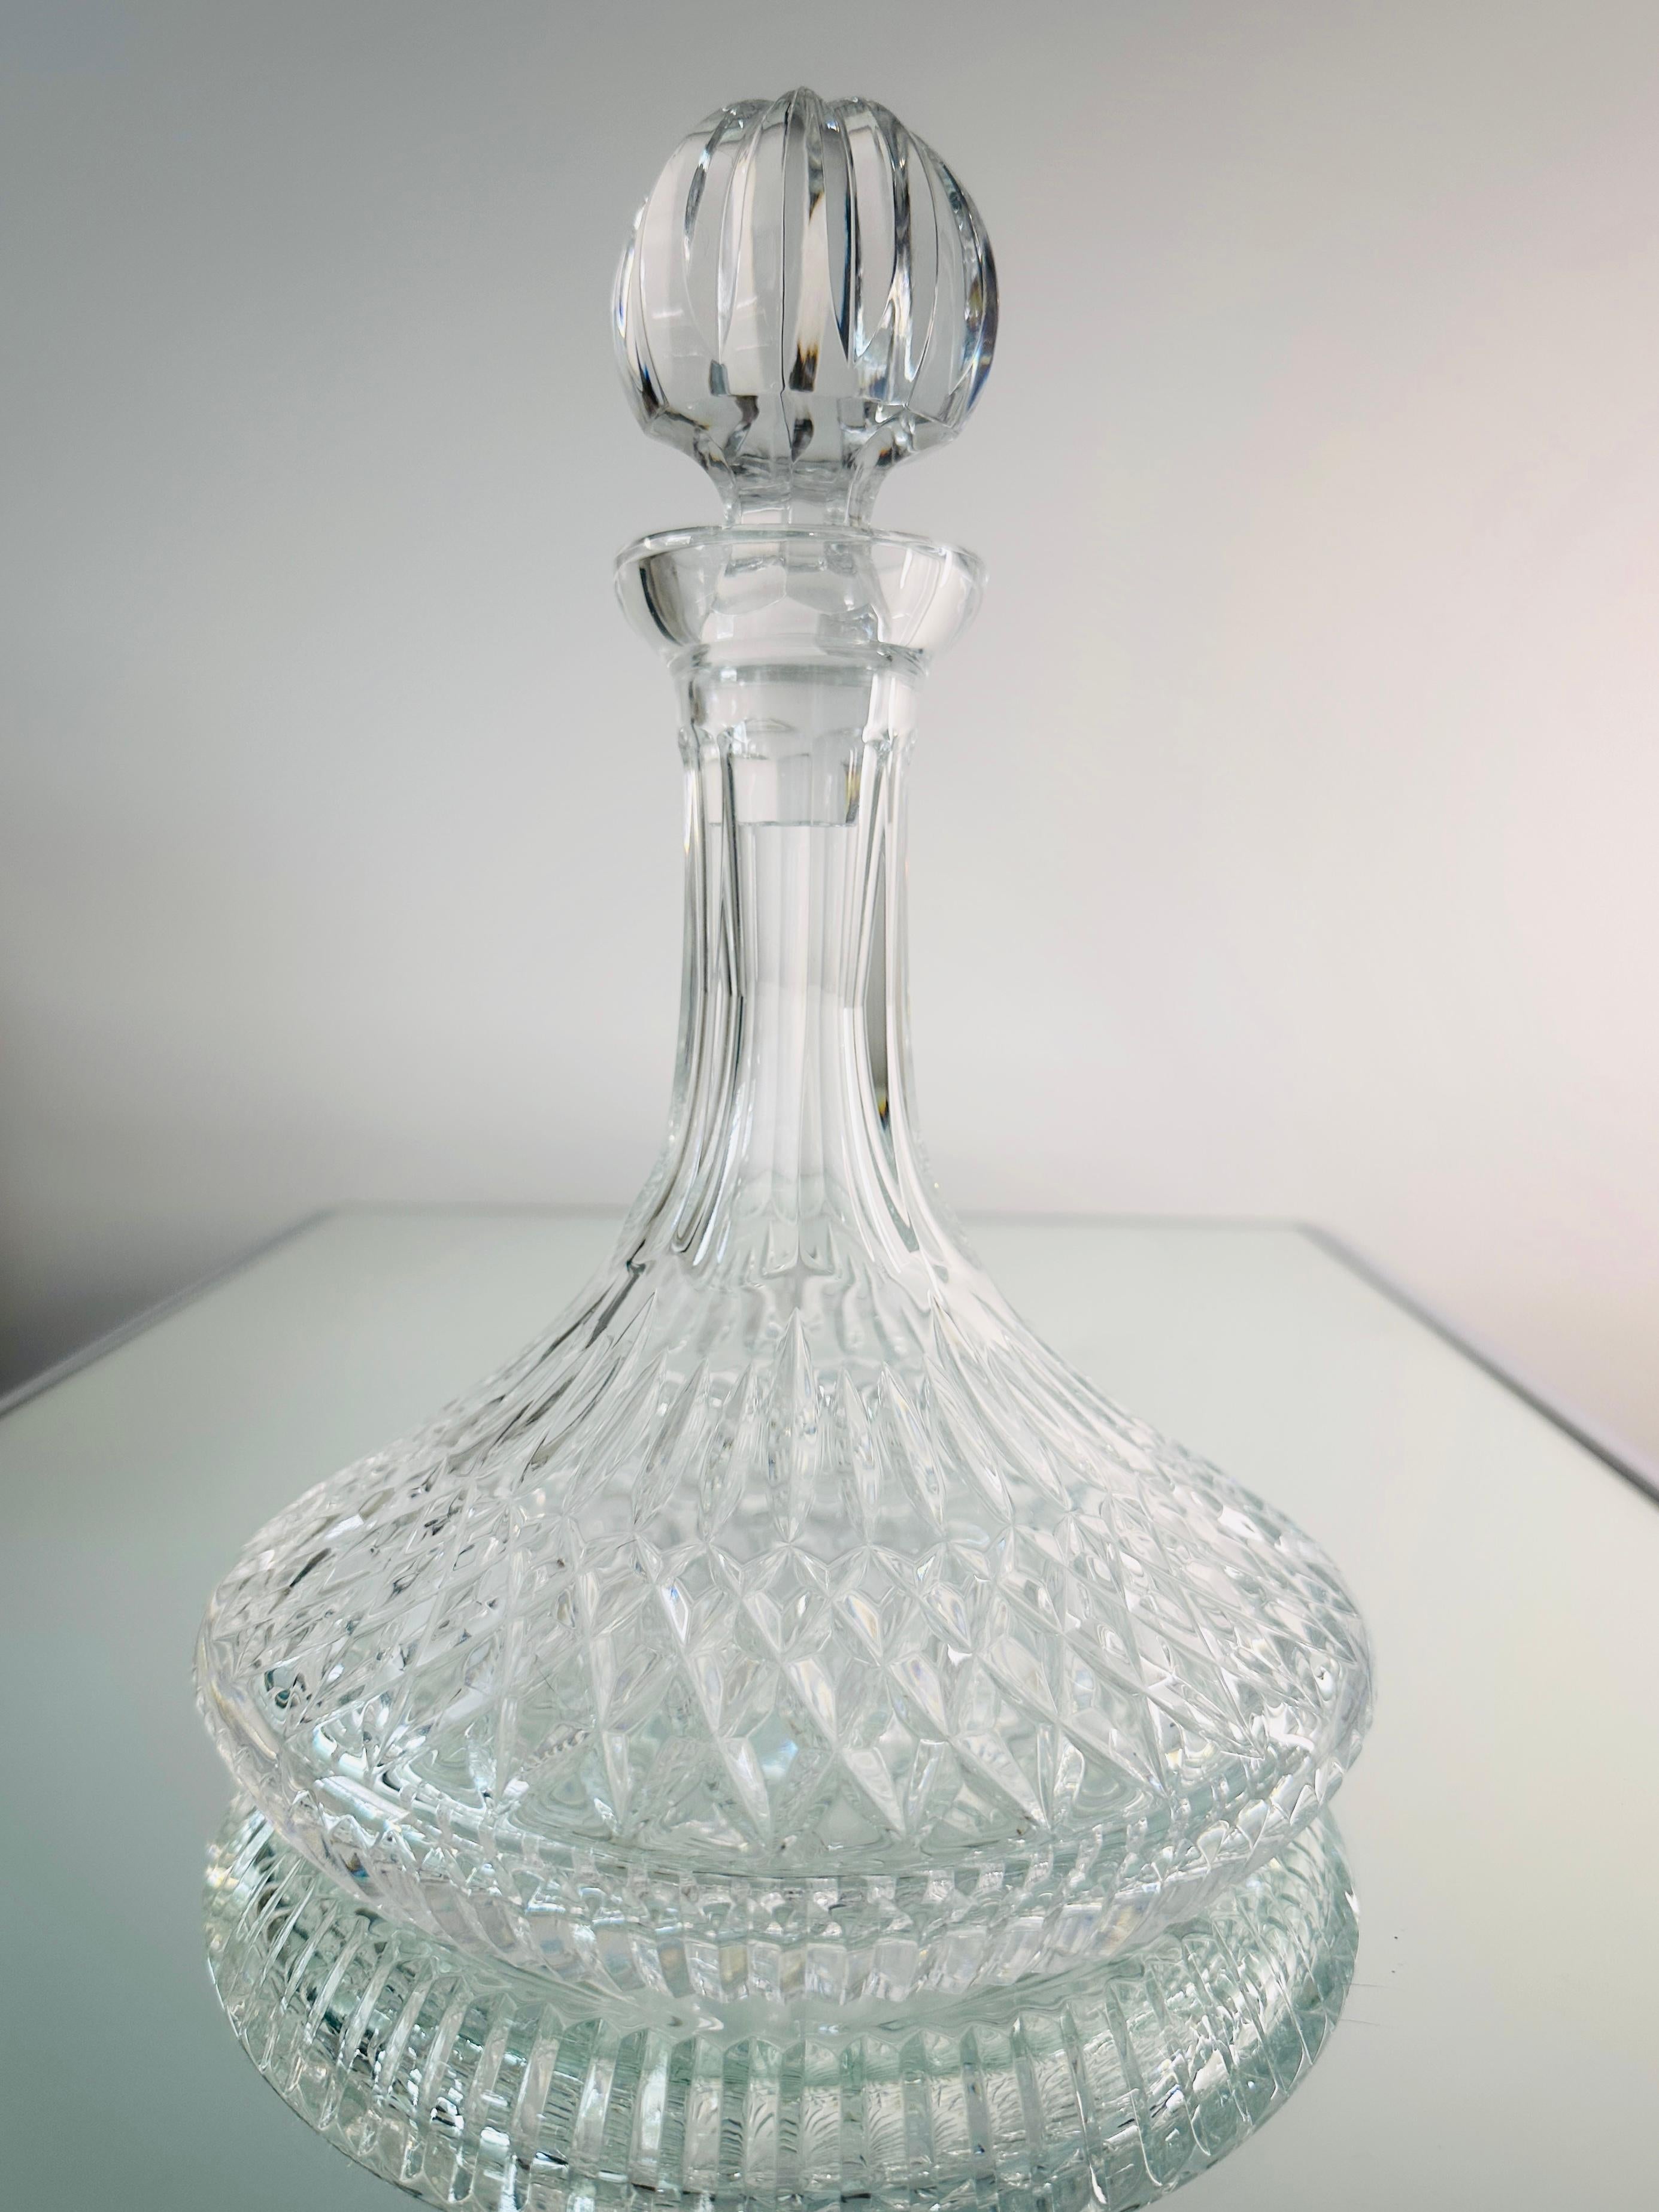 Stunning vintage ships decanters by Waterford Crystal from the classic Lismore Series, first introduced in the early 1950's.  Handcrafted and mouth-blown lead crystal featuring brilliant prismatic diamond cuts with etched designs throughout.  Also